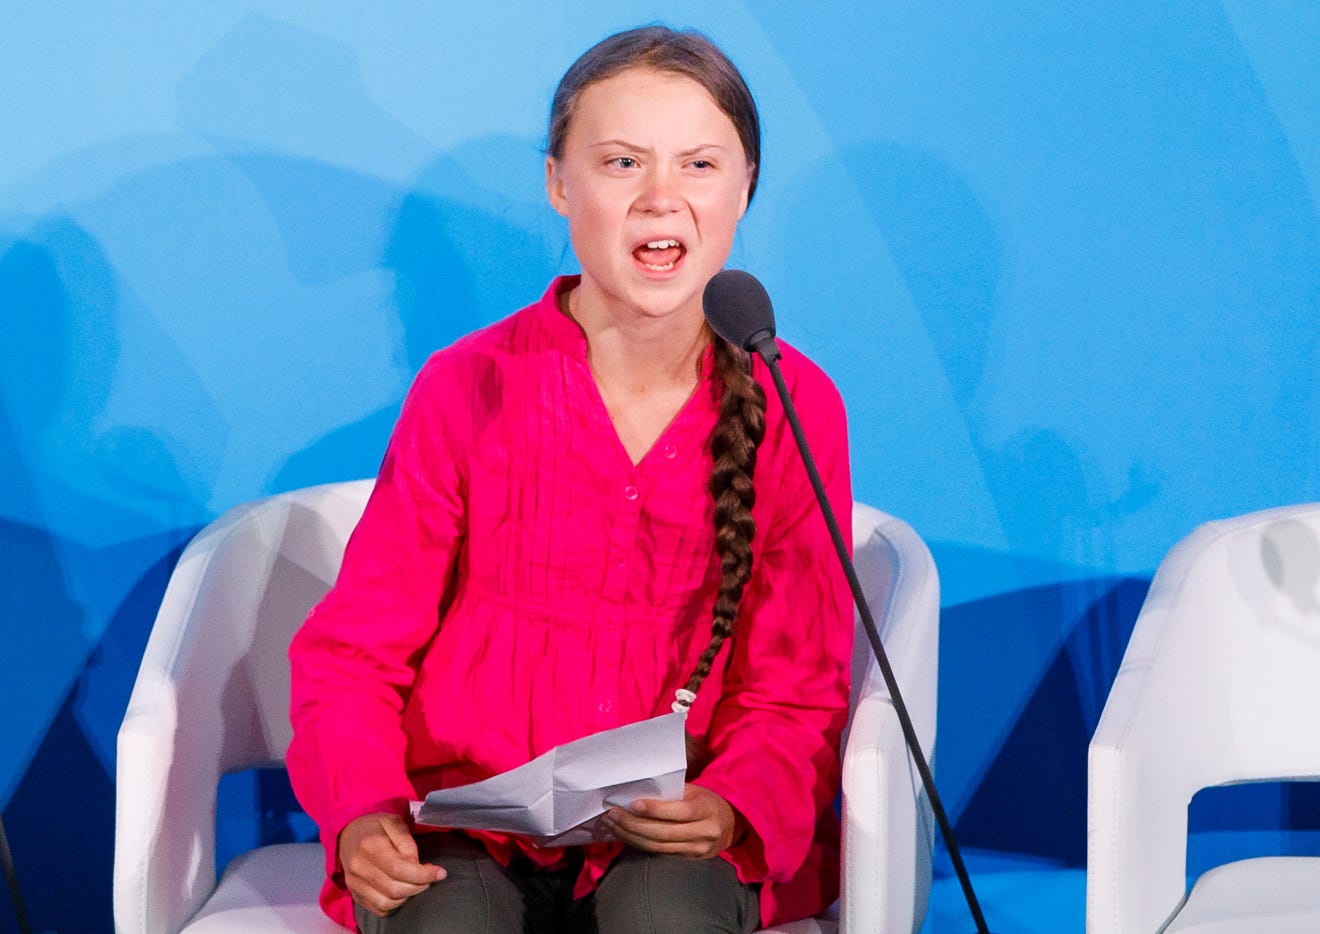 Environment Quotes Greta Thunberg Greta Thunberg Powerful Quotes On Climate Change For Those Who Want To